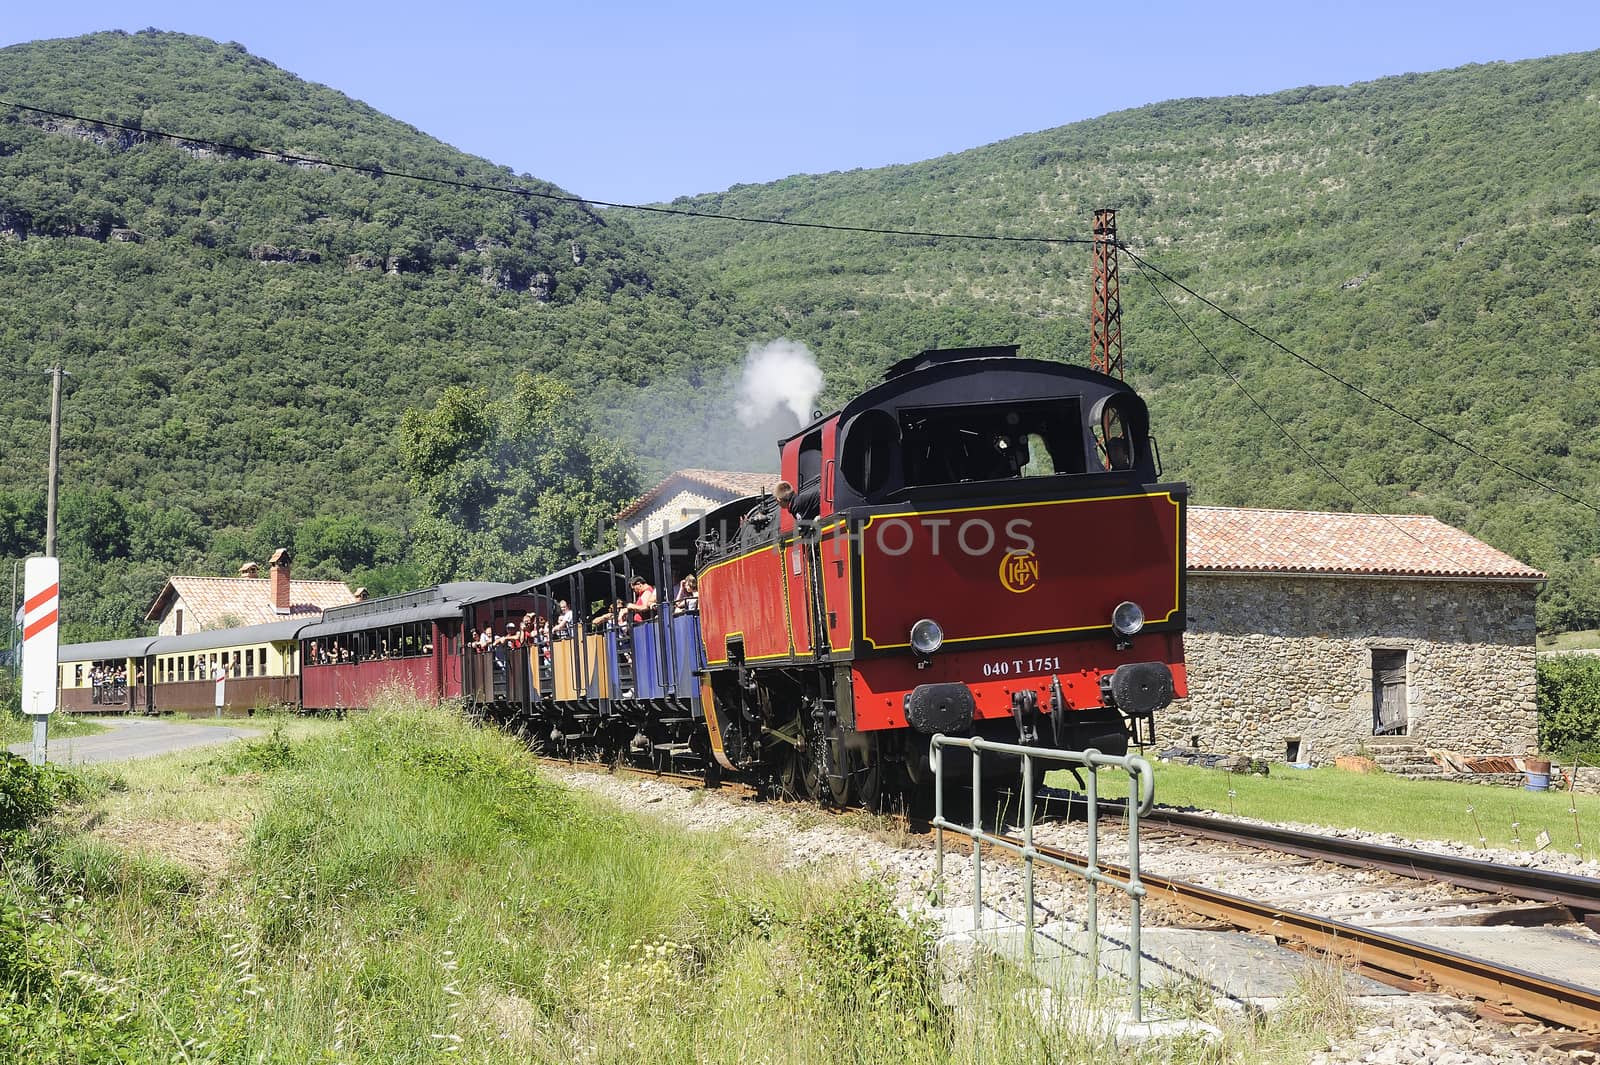 The tourist train from Anduze returning from Saint-Jean-du-Gard and locomotive hangs upside down because there is only one way and turn around is impossible.